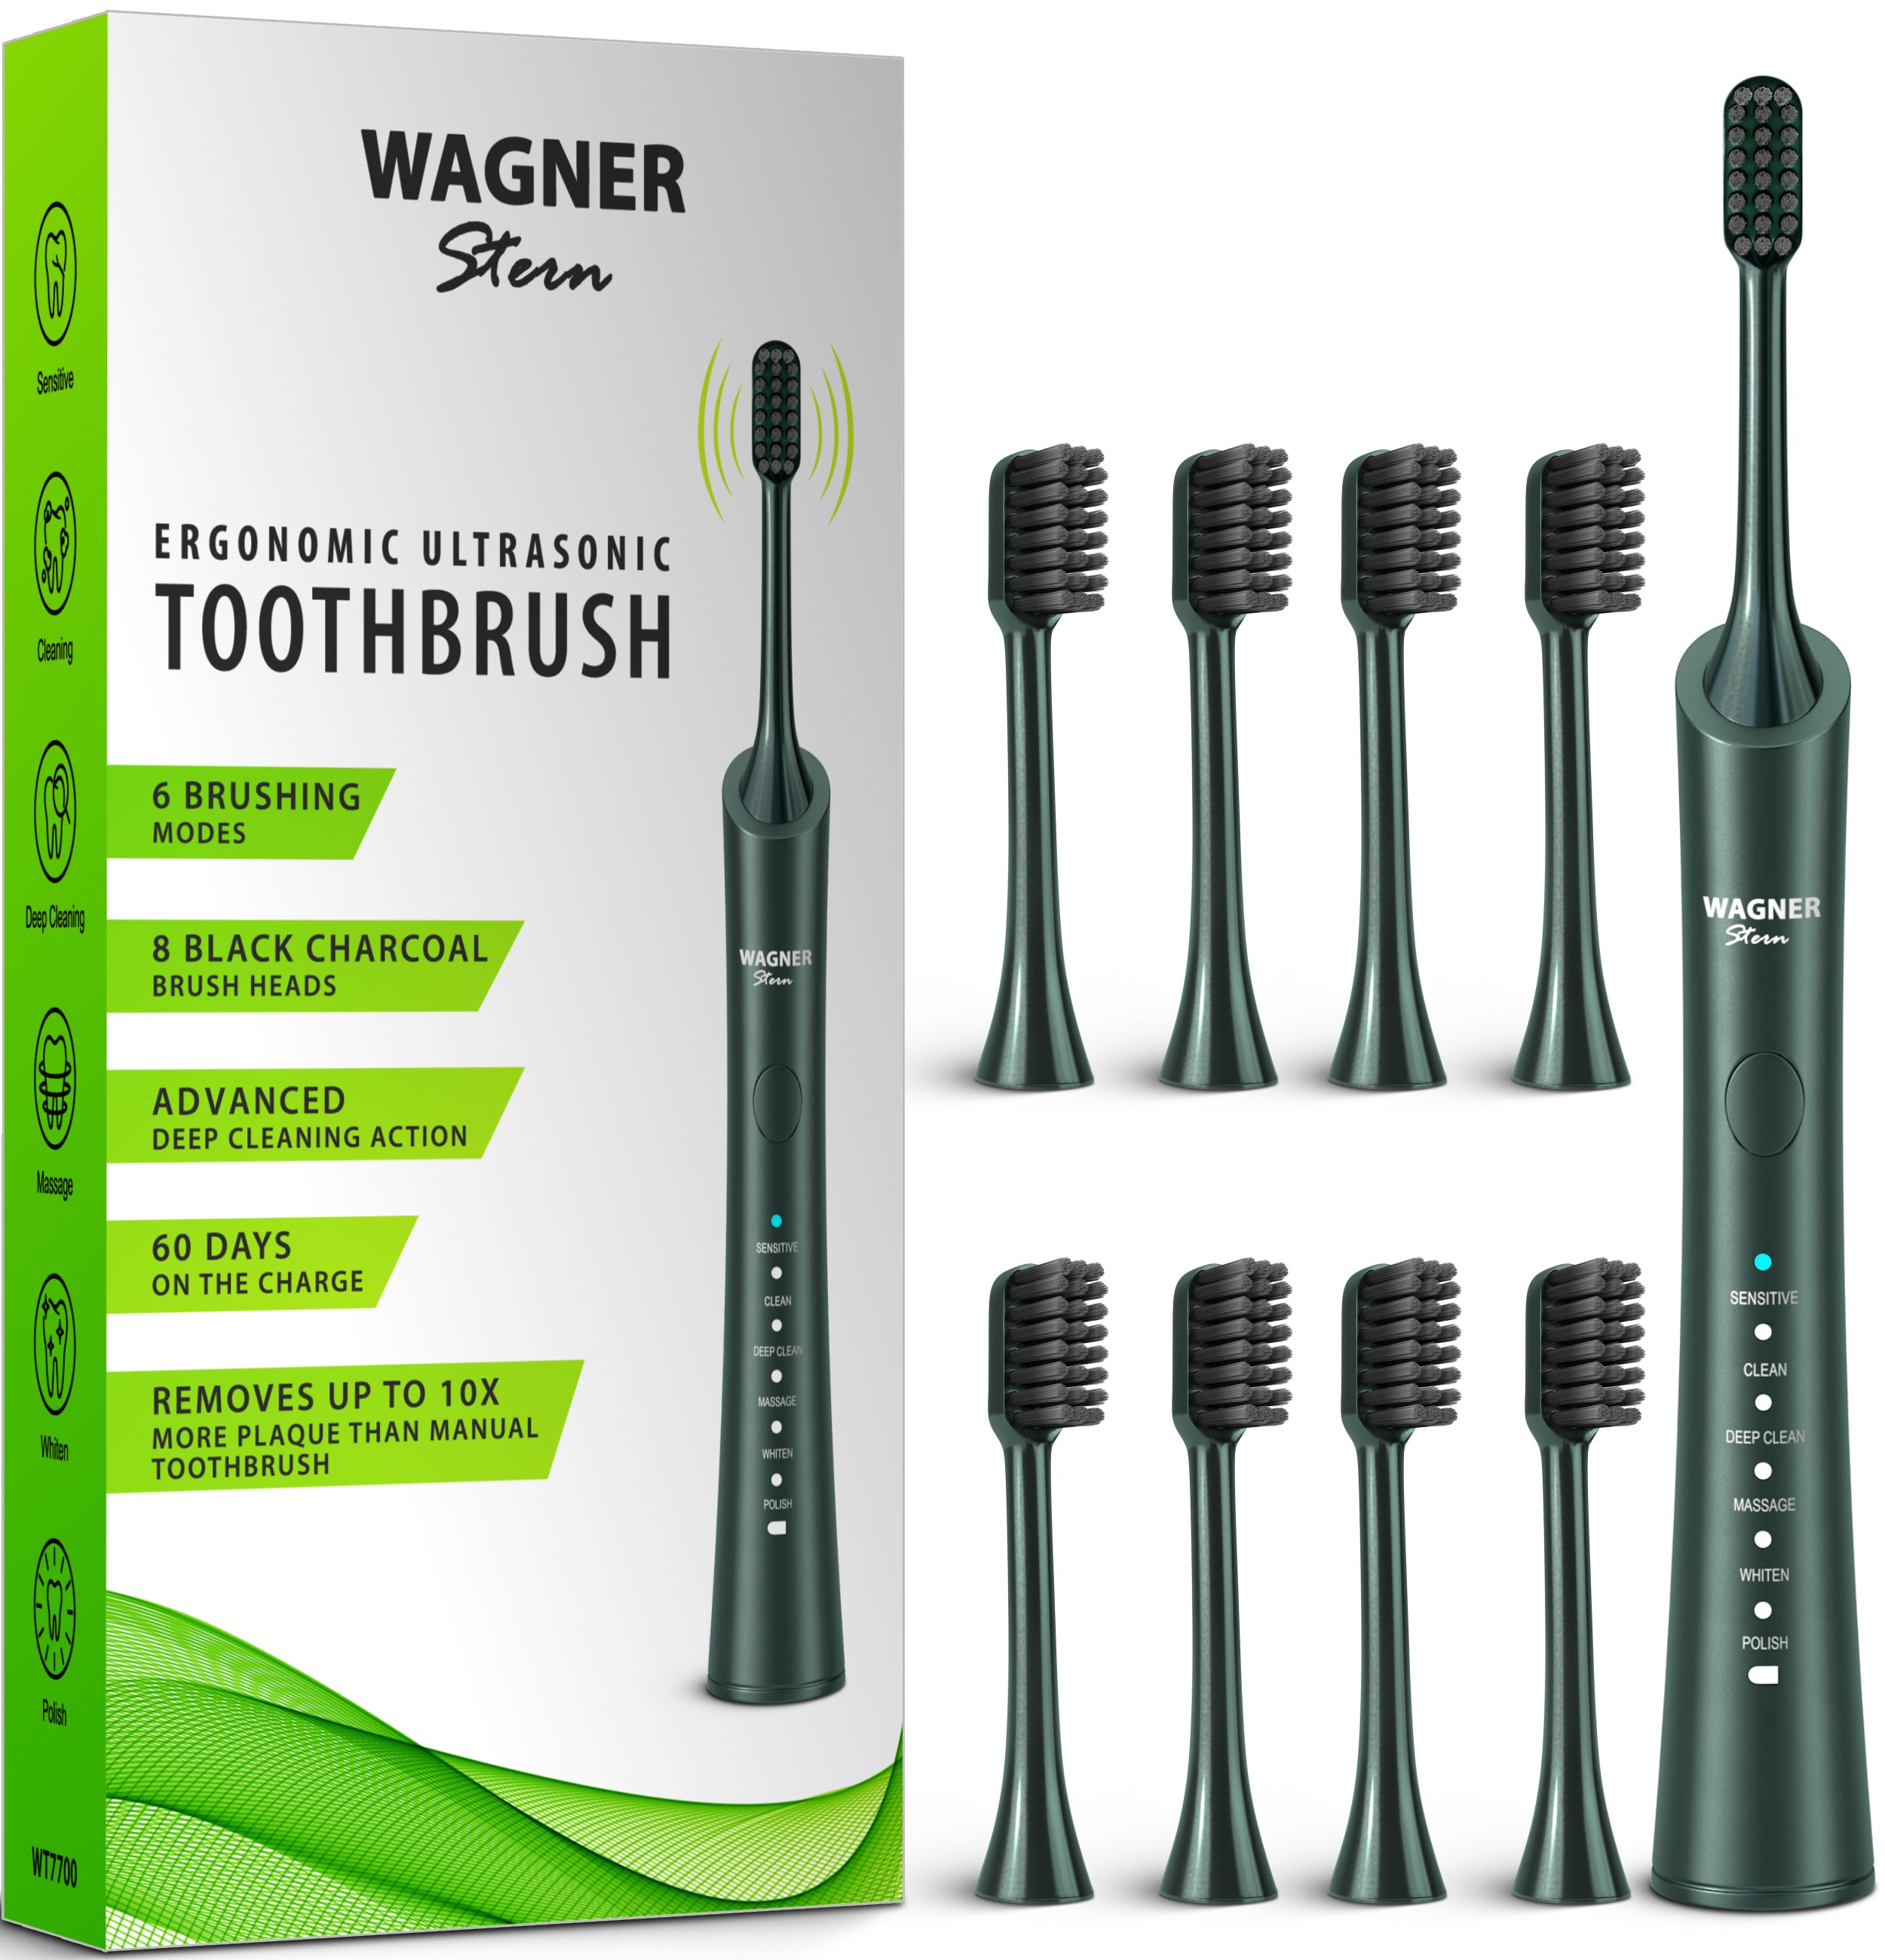 Wagner & Stern ultrasonic whitening Electric Toothbrush with 8 Charcoal Black Brush Heads. for Fresh Breath & Healthy Smile. (Green)